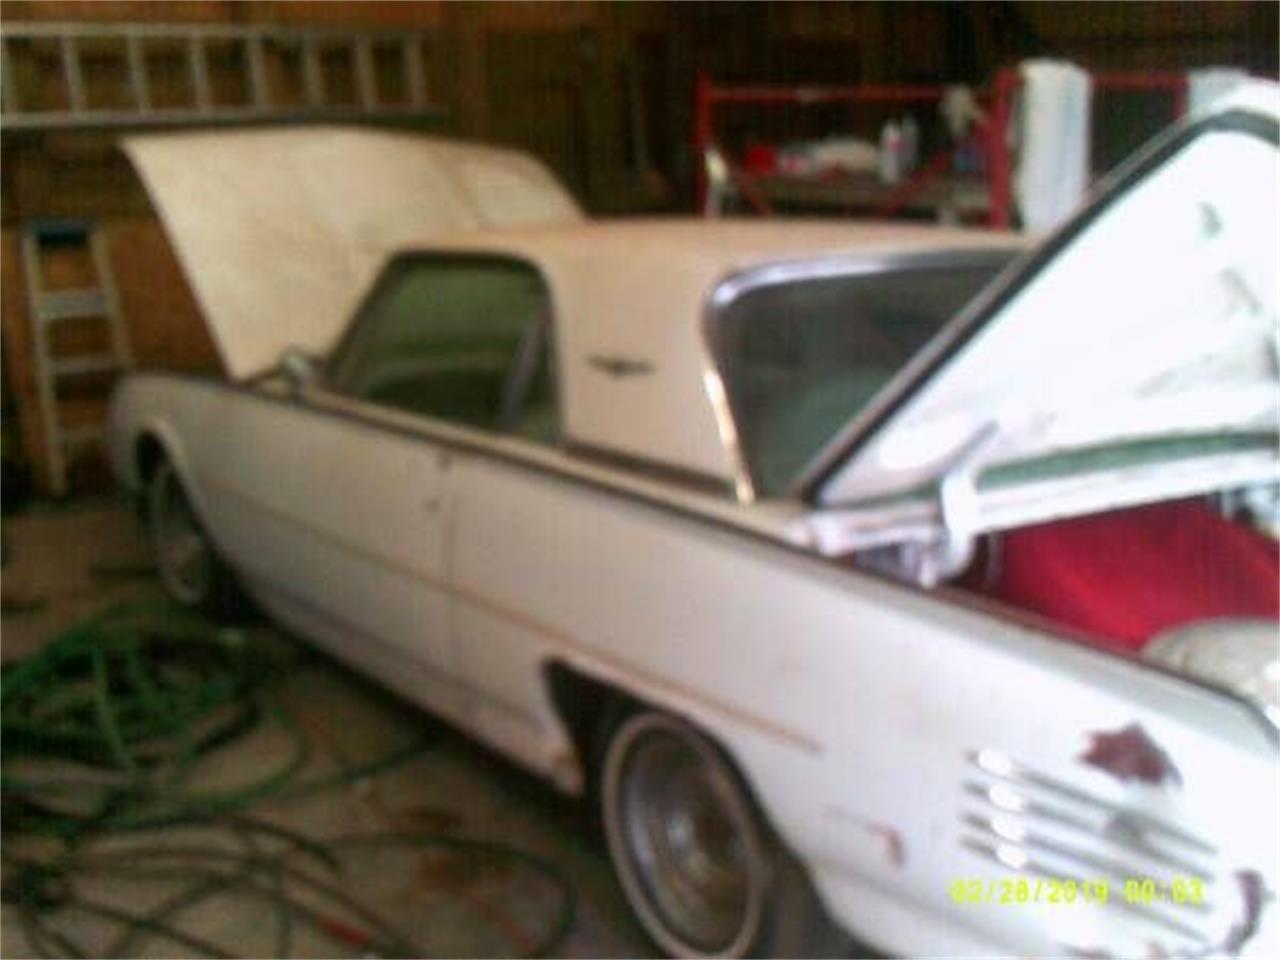 1966 Ford Thunderbird for sale in Cadillac, MI